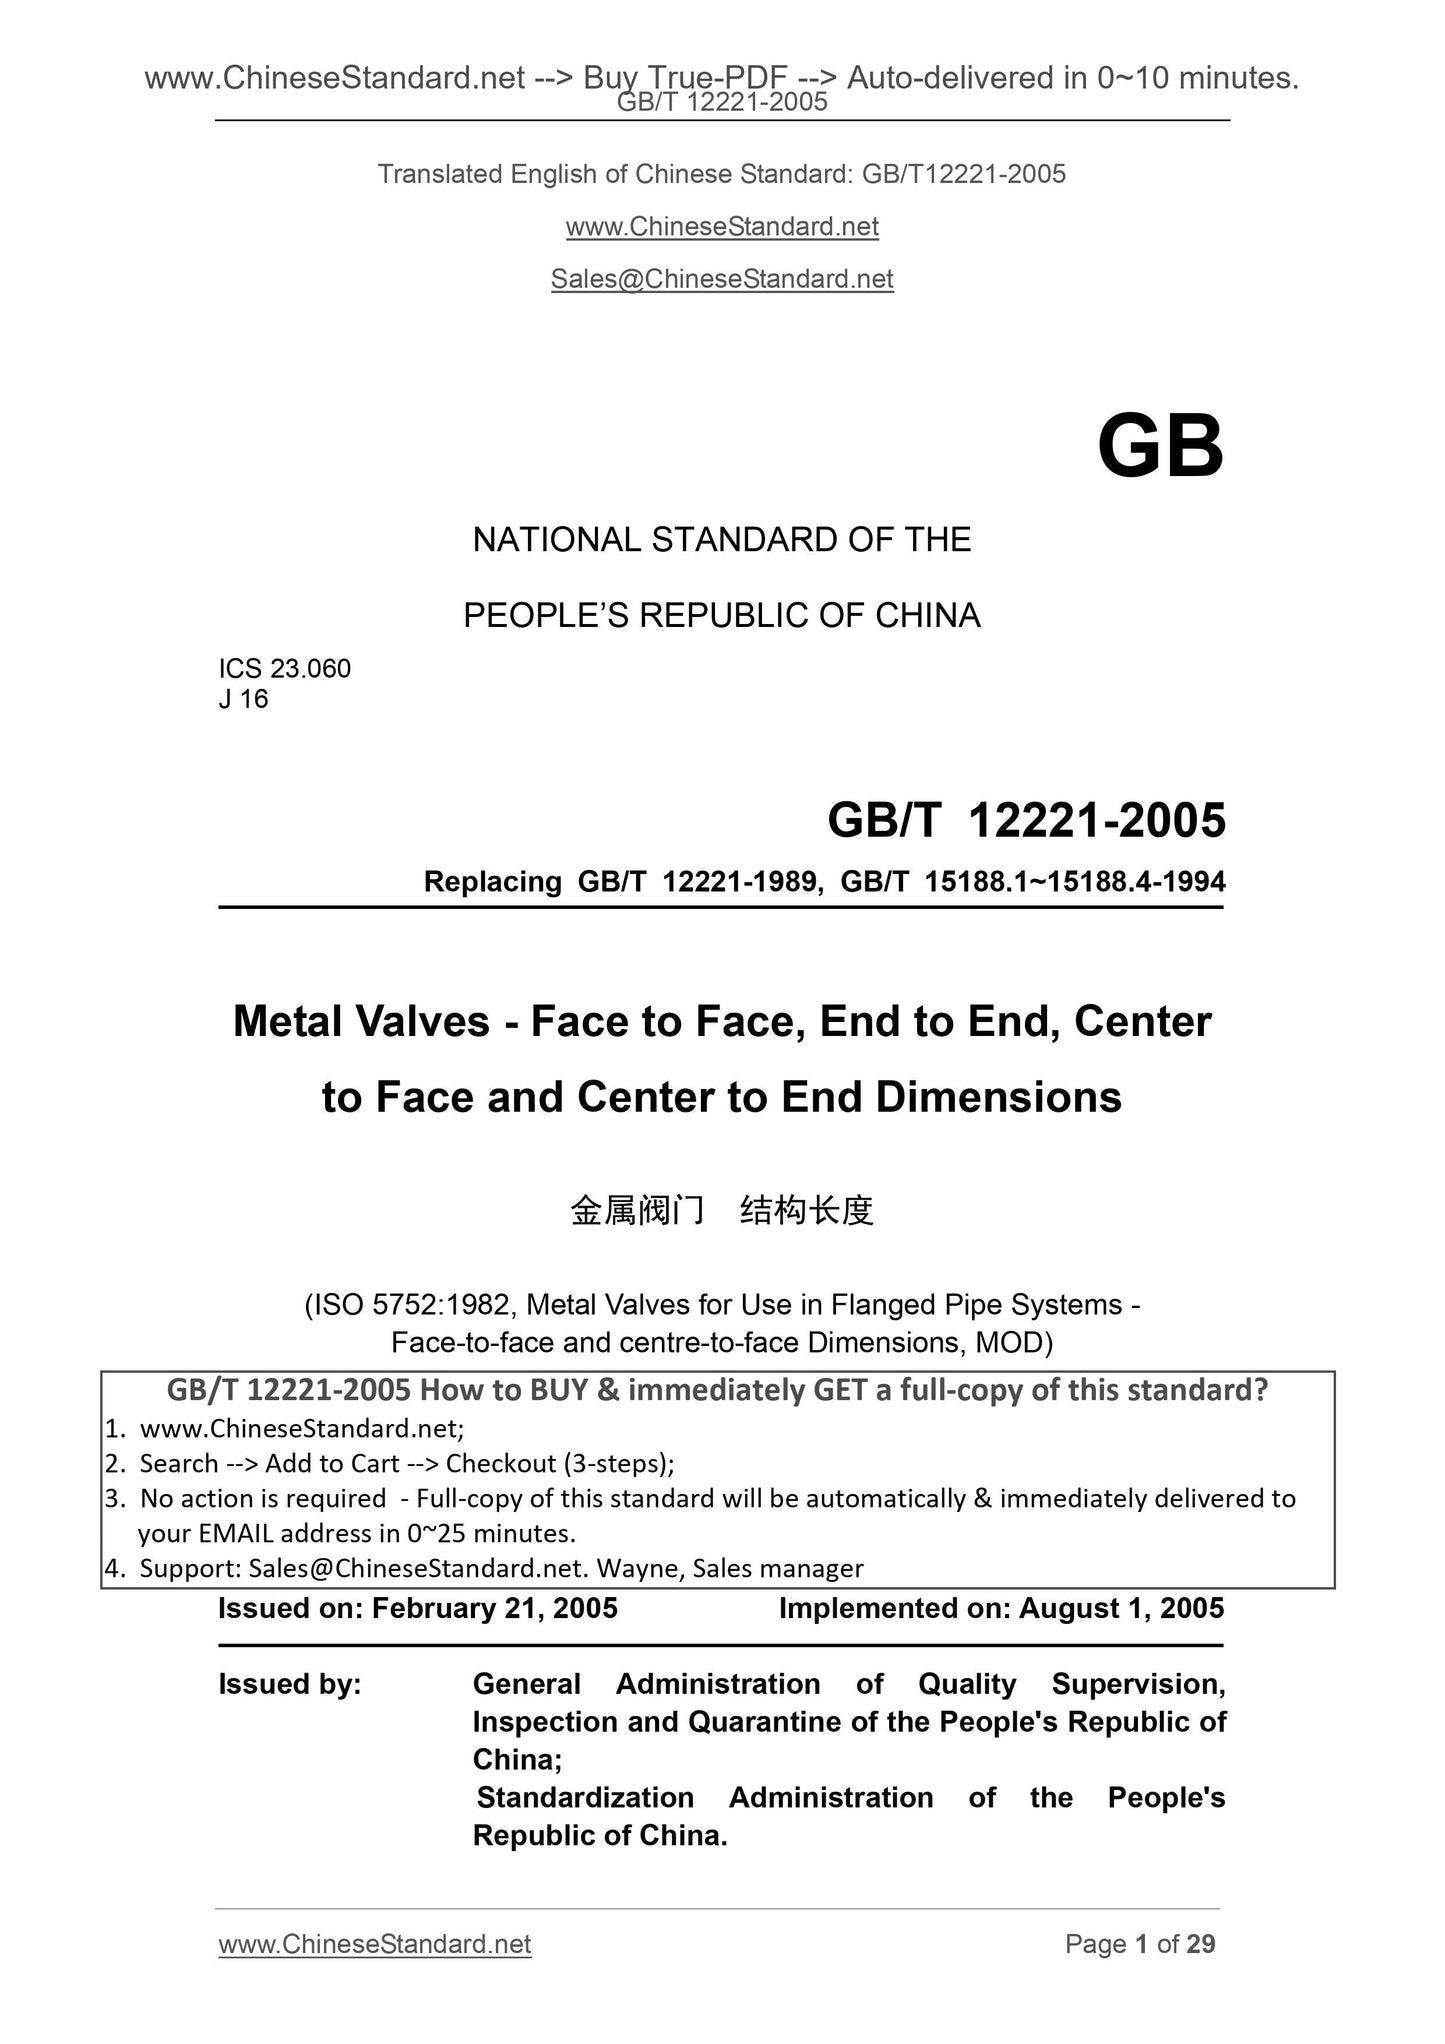 GB/T 12221-2005 Page 1